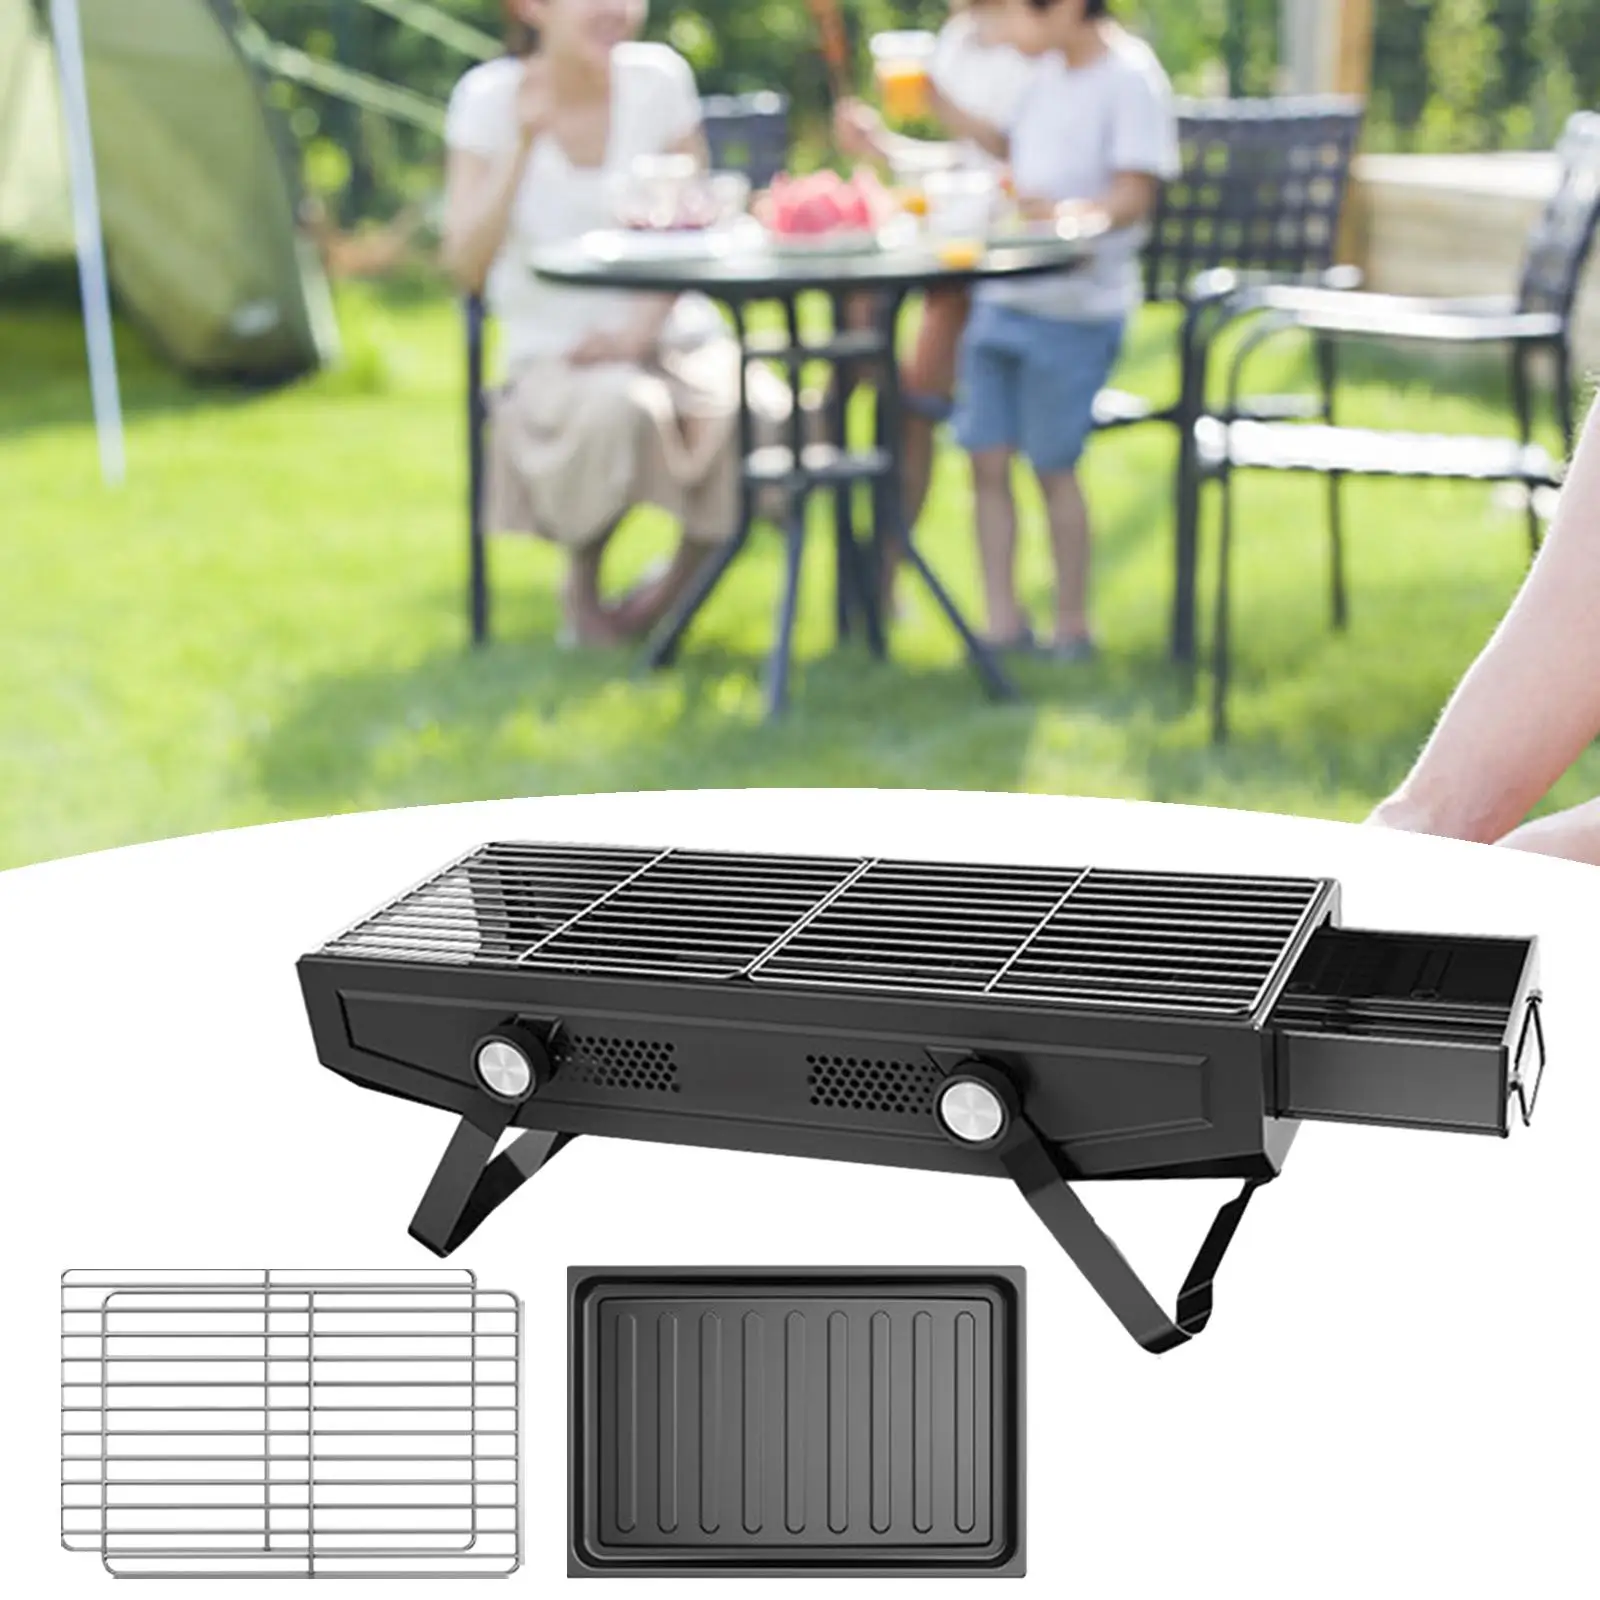 Barbecue Camping Grill Firewood Burning Grill Stove Charcoal BBQ Grill Folding Grill for Garden Trekking Backyard Camping Beach